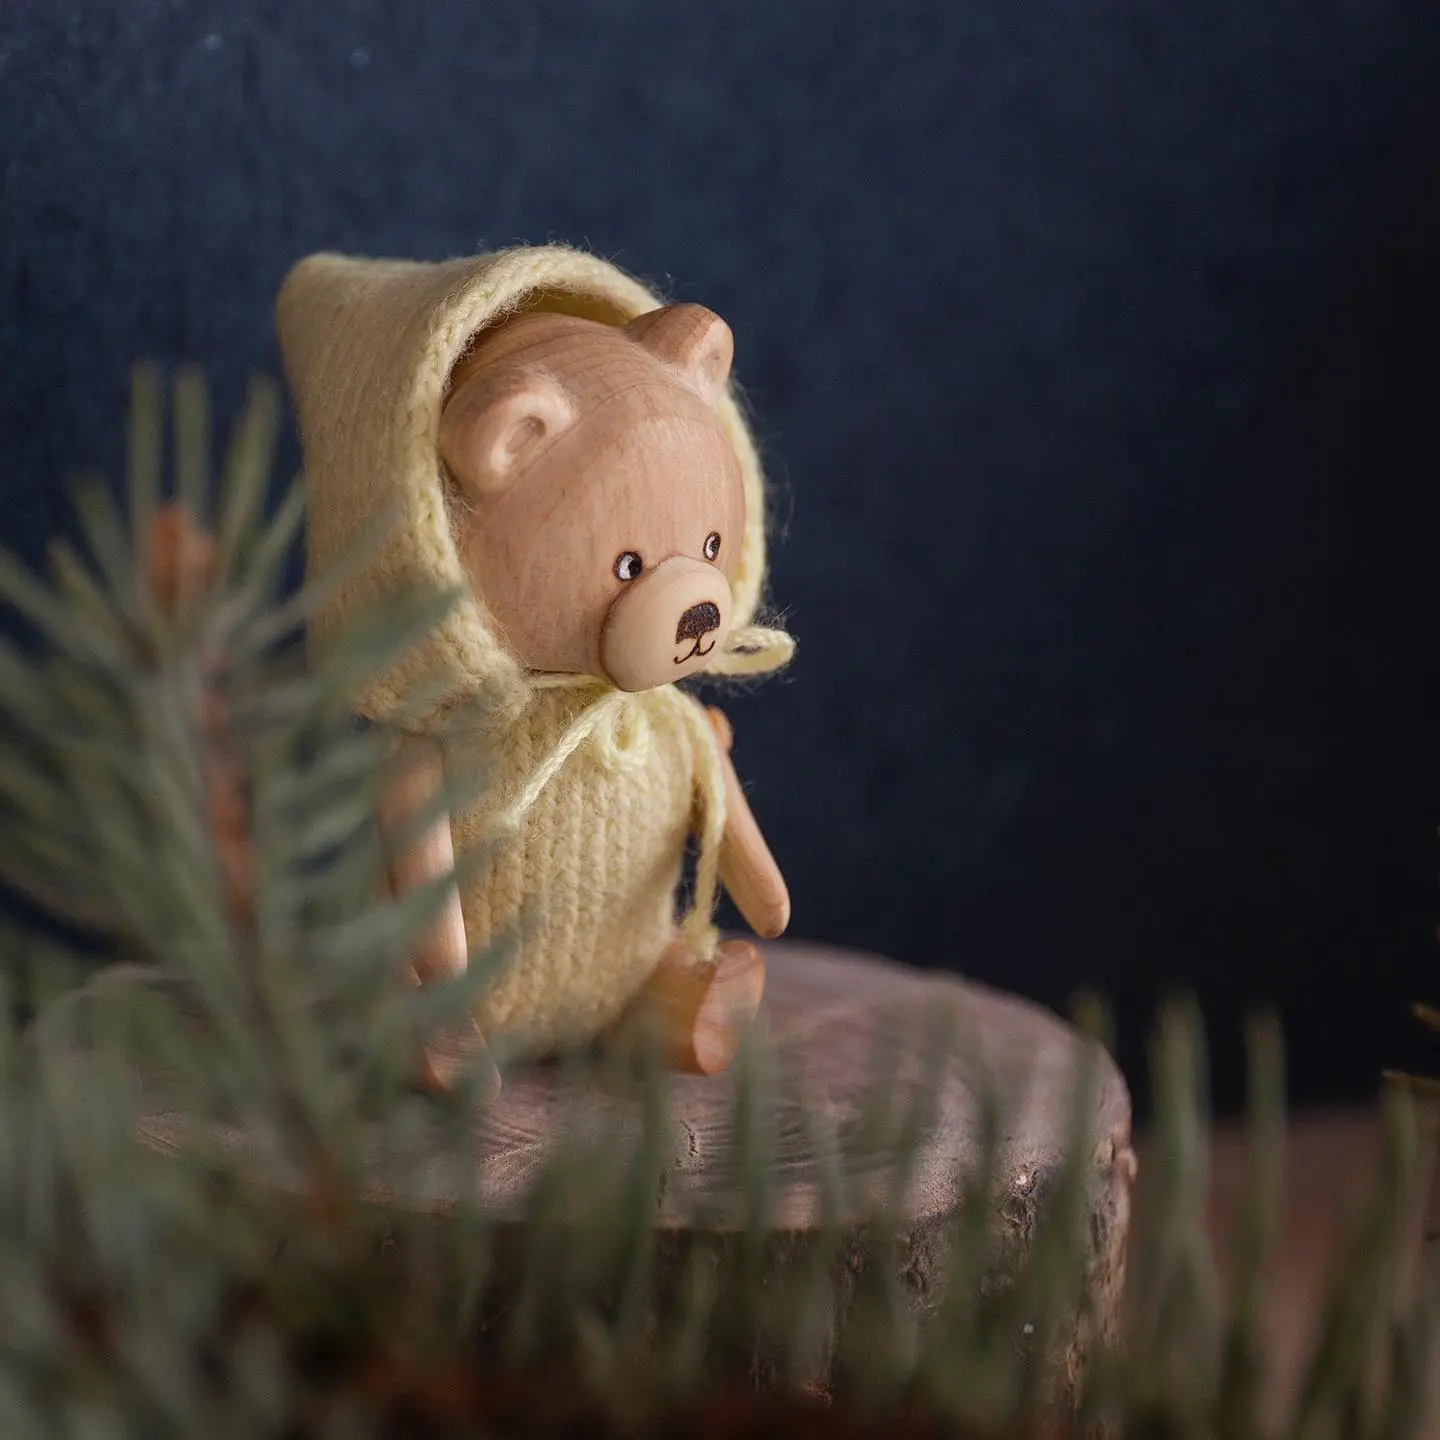 Wooden miniatures by Alena Olha